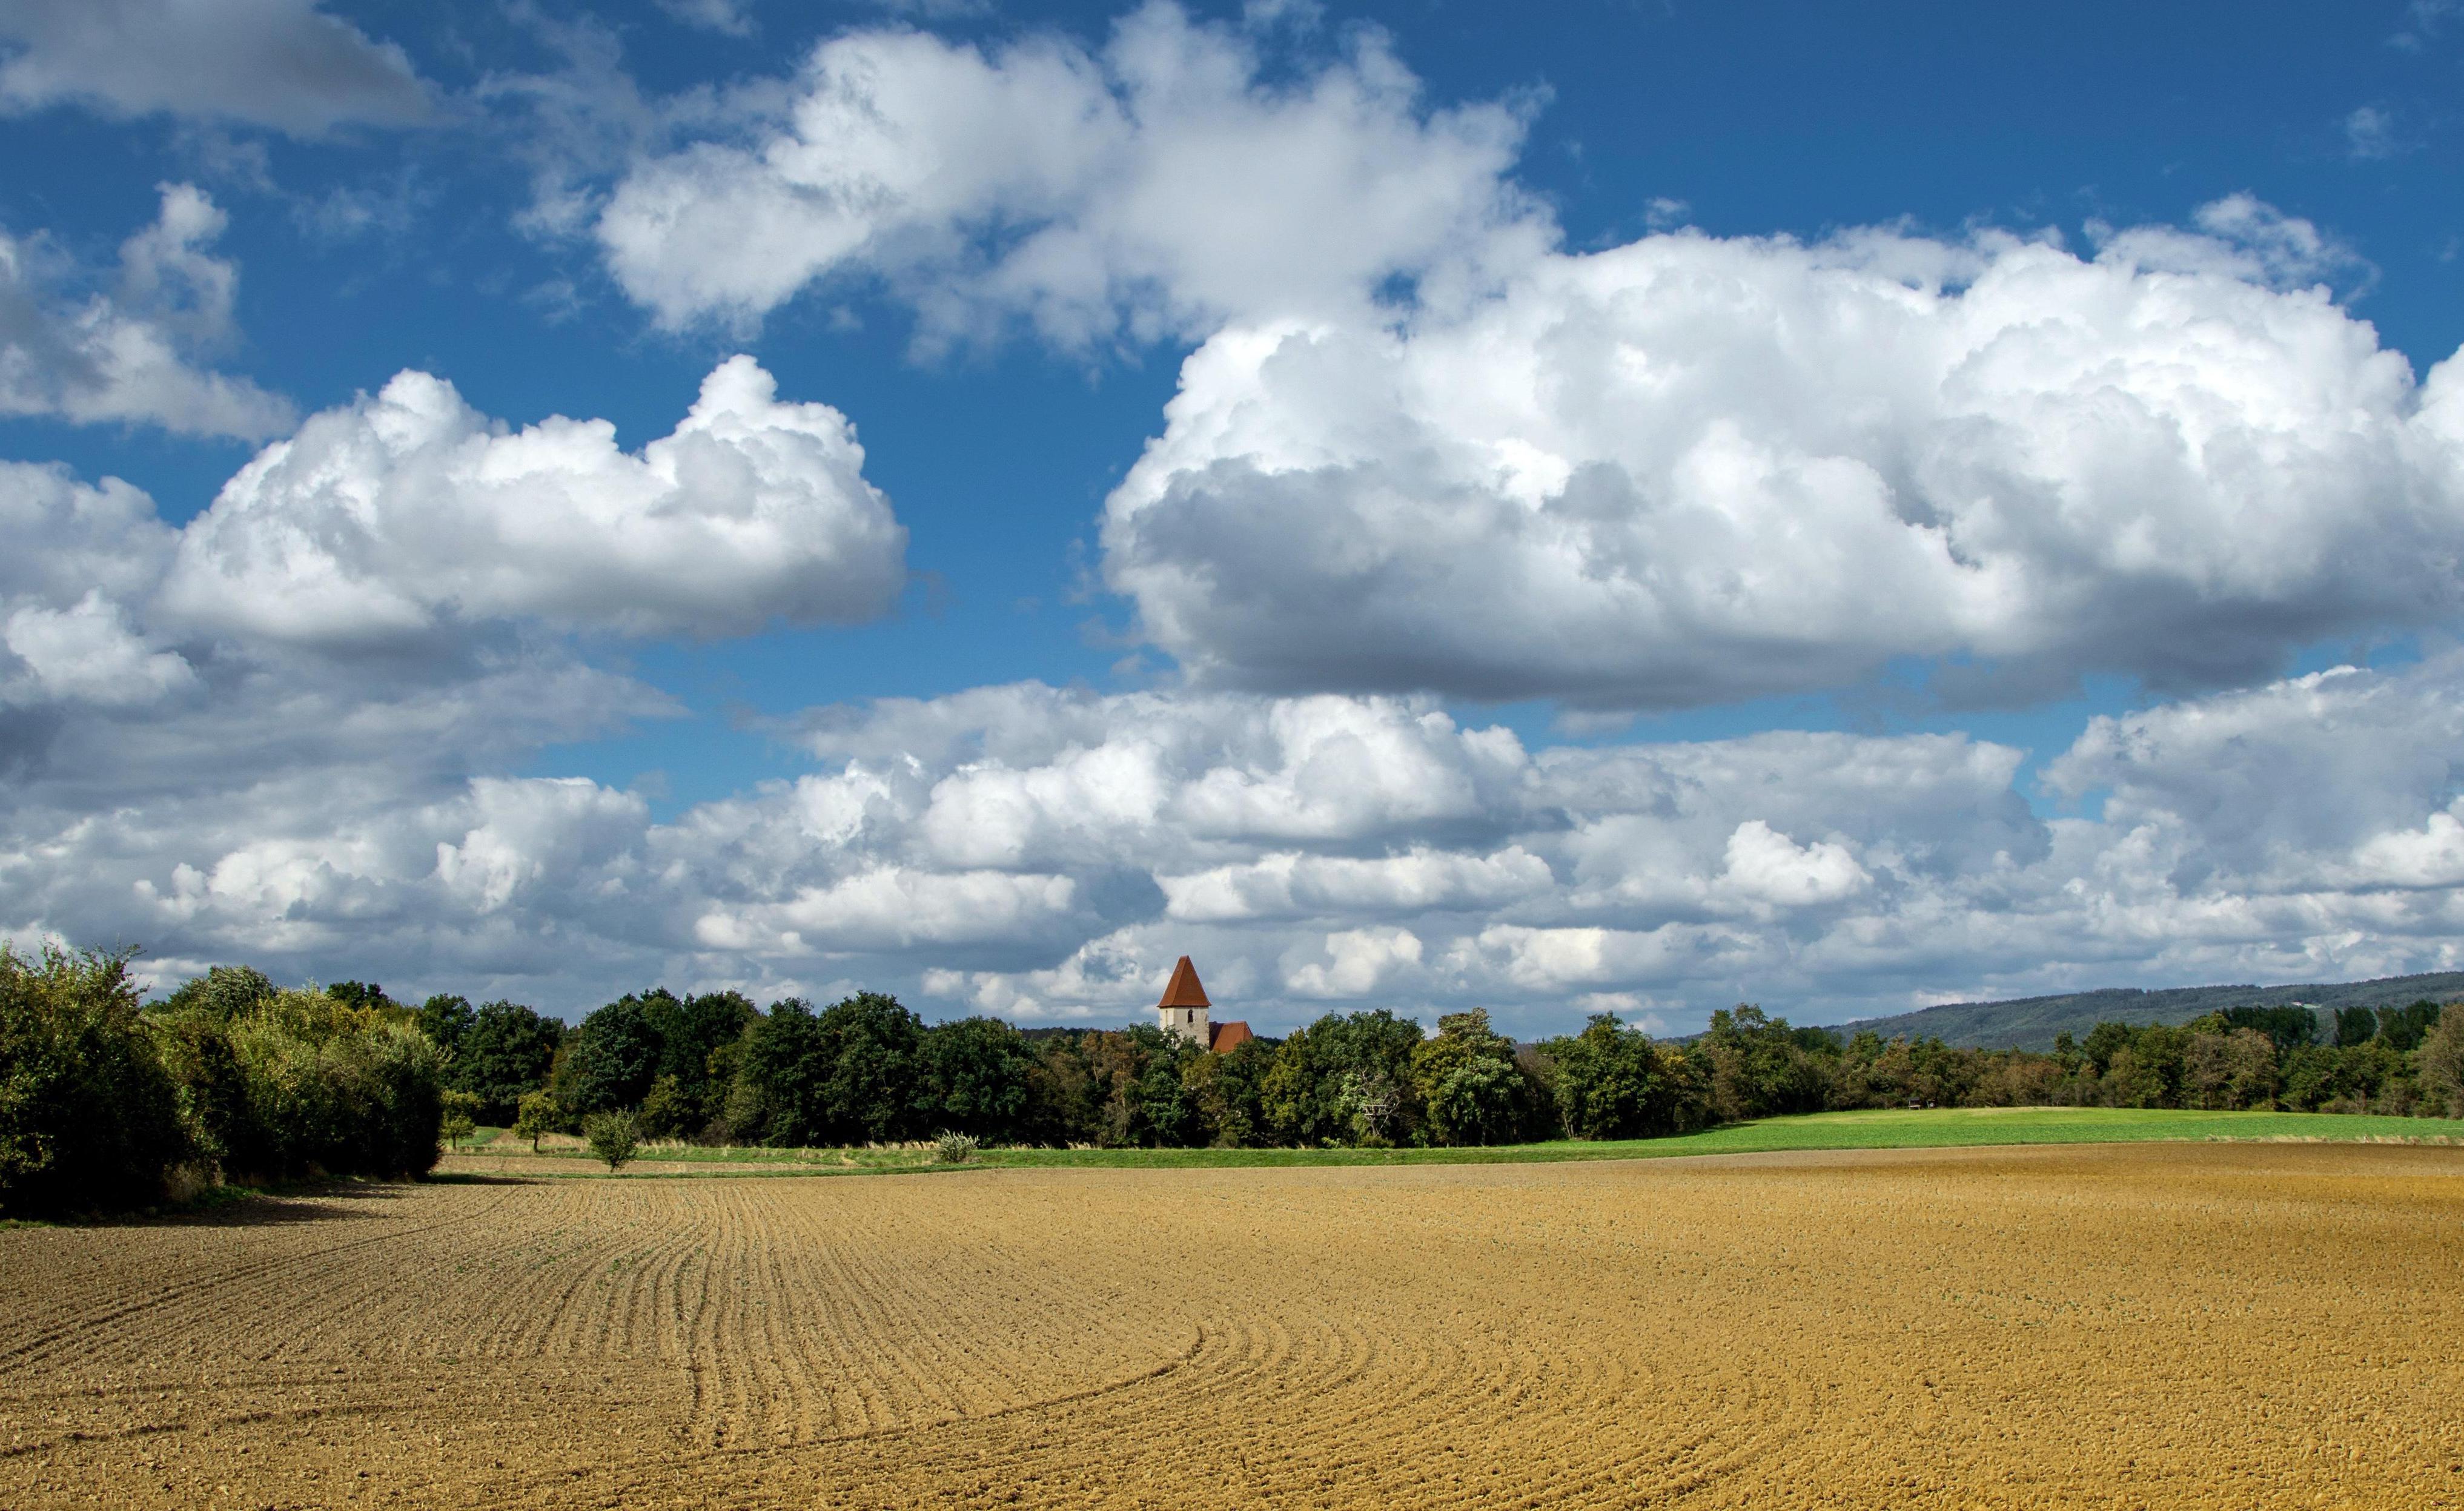 Agricultural landscape - field extending across the entire width of the picture in front of a row of trees, behind which a village is hidden, indicated only by a church tower. In the background blue sky with few clouds.